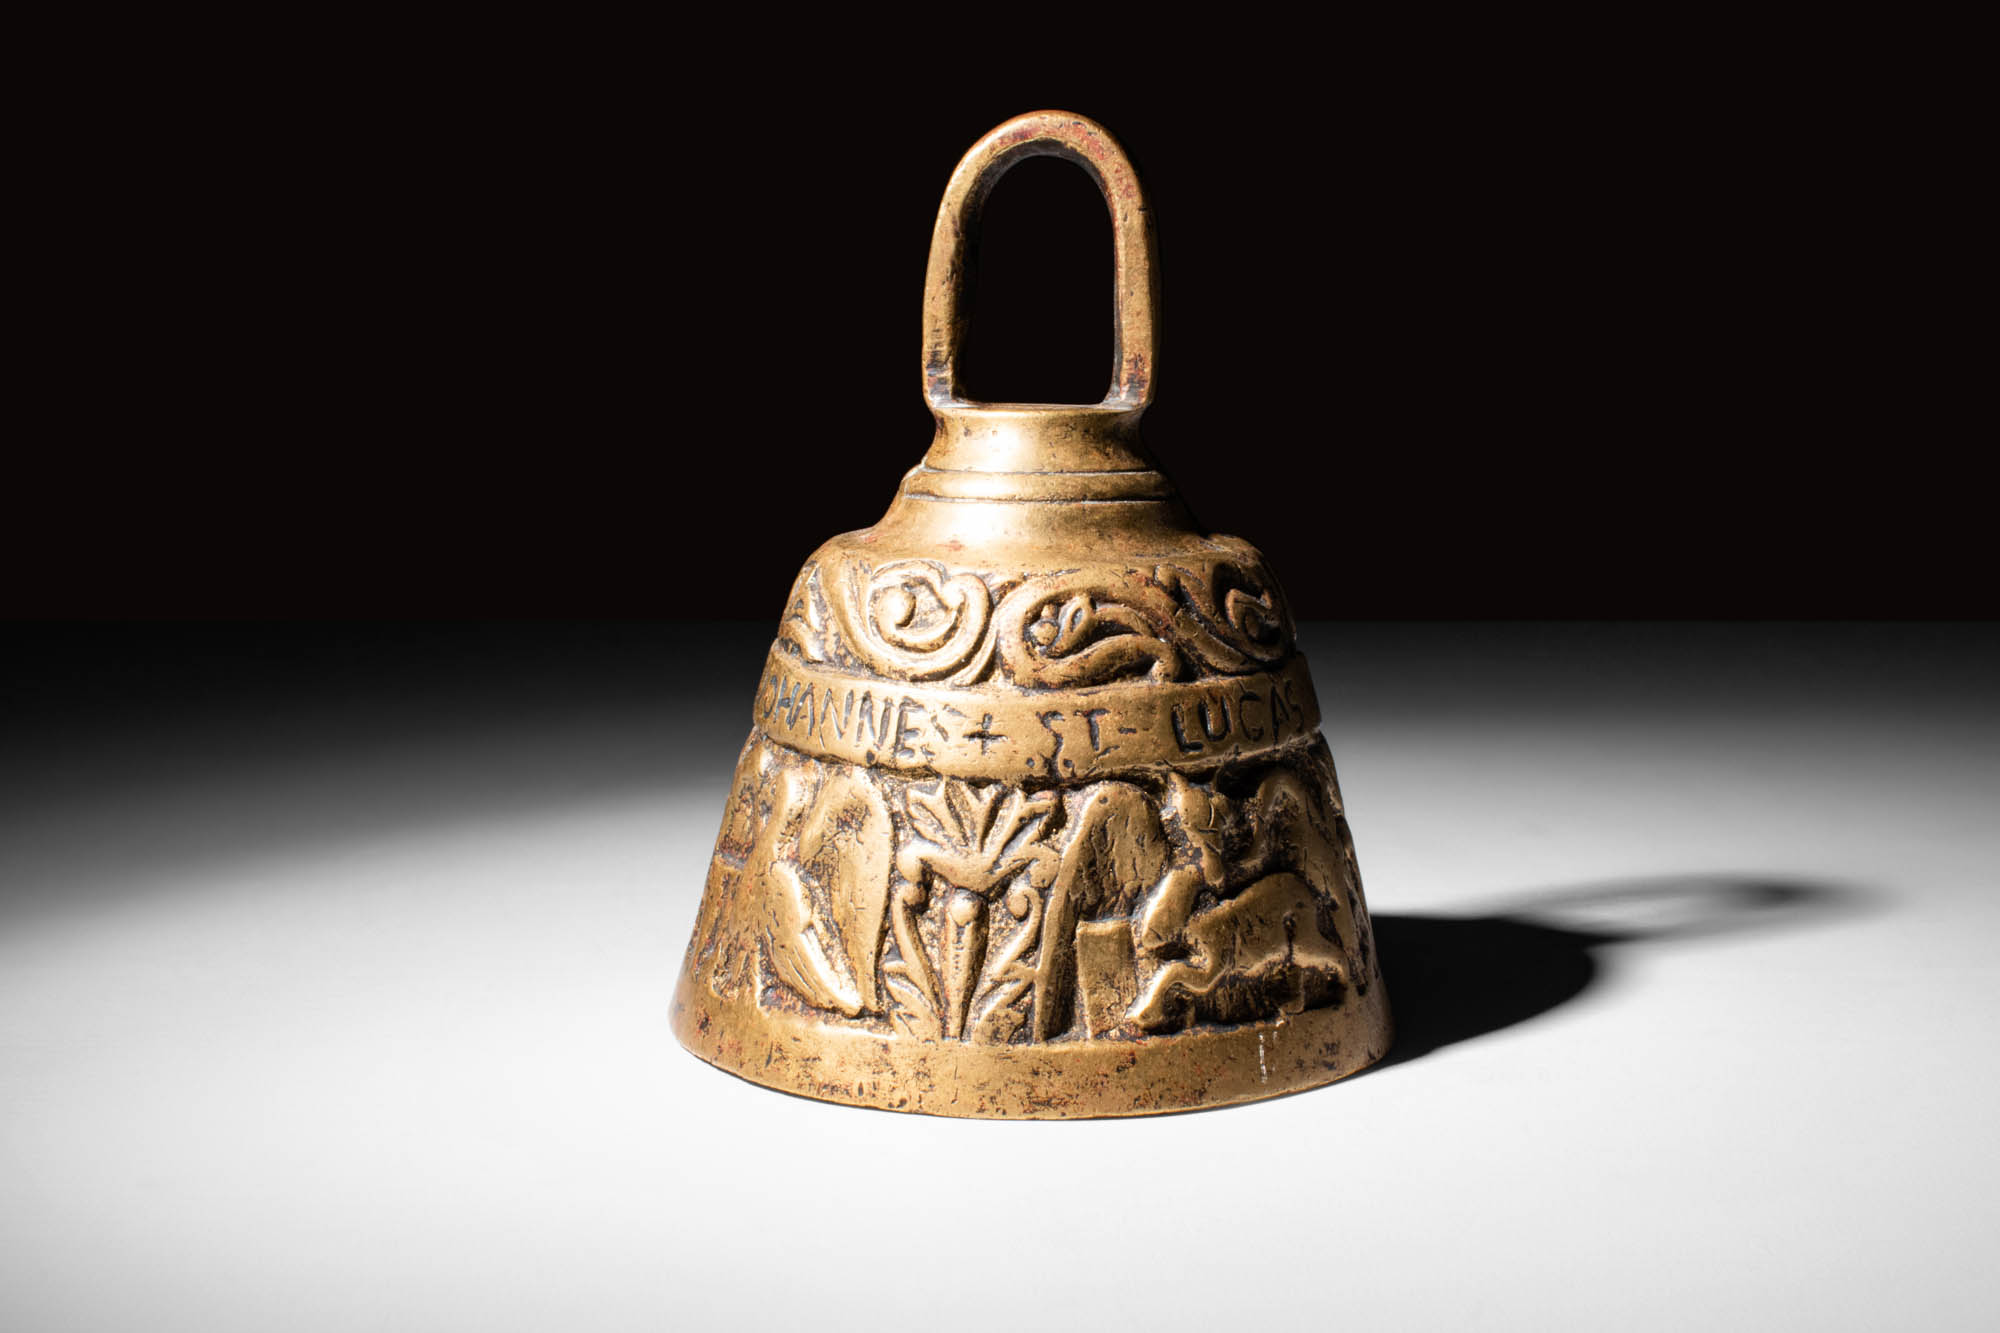 LATE MEDIEVAL BRITISH BRASS BELL - Image 4 of 6